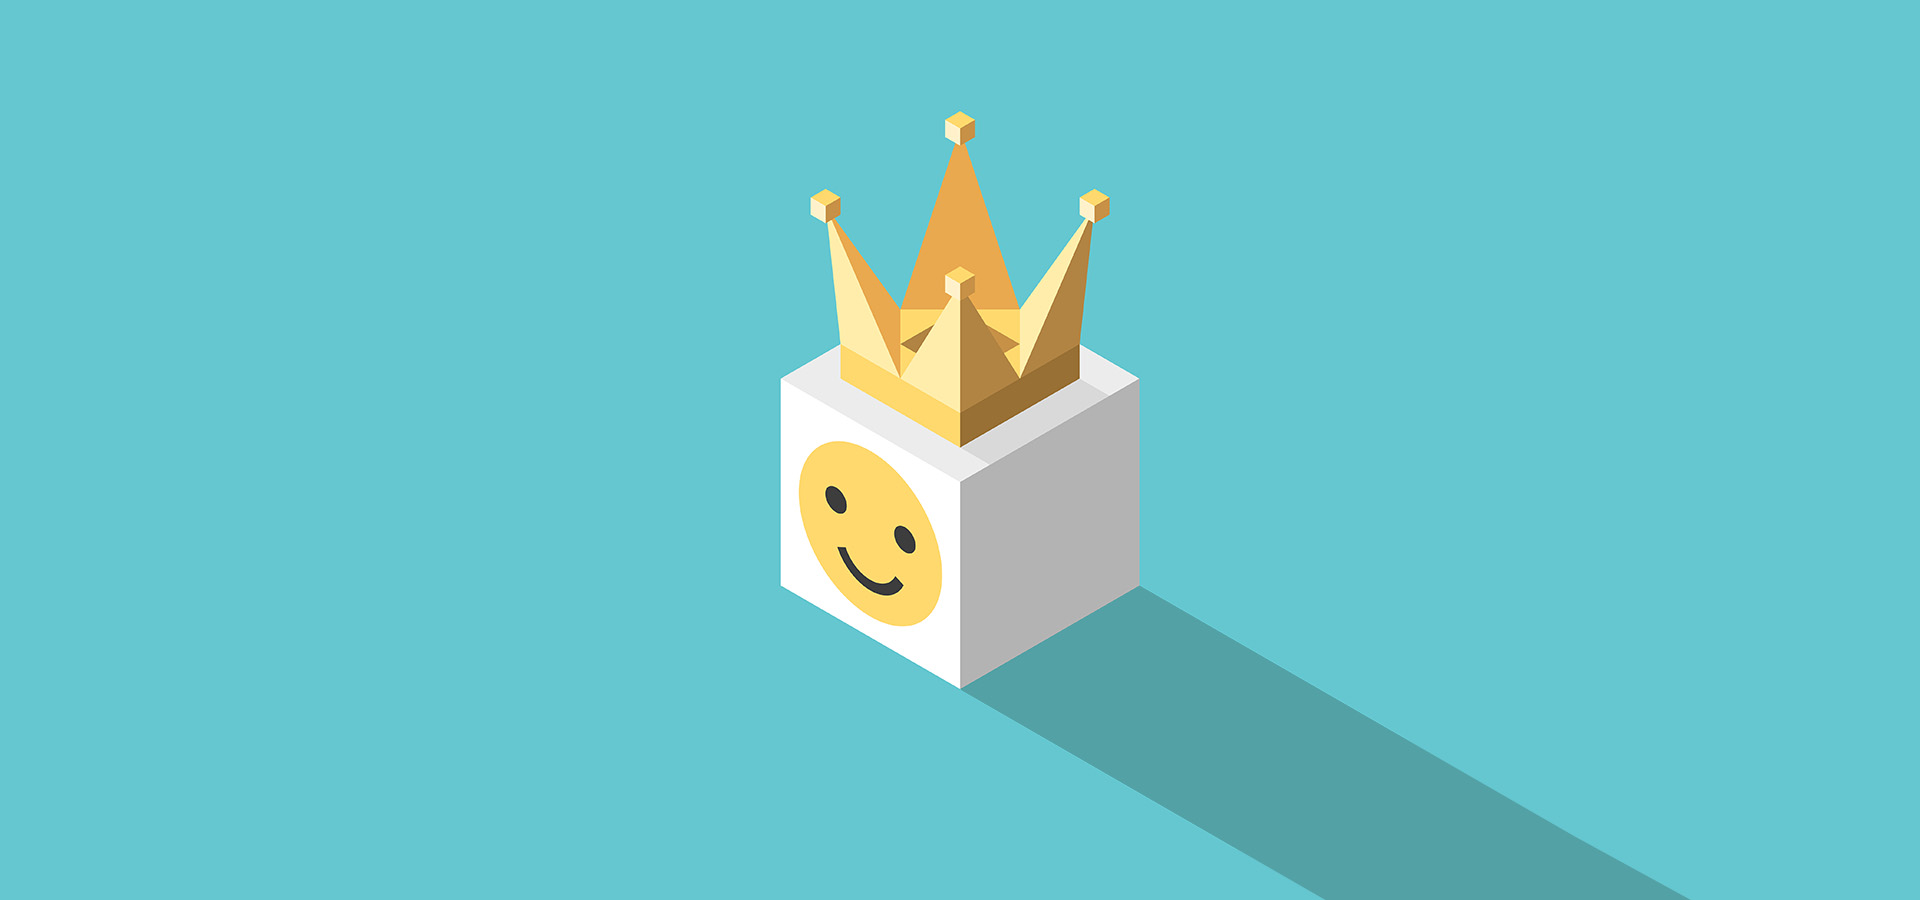 White cube with smiley face and crown